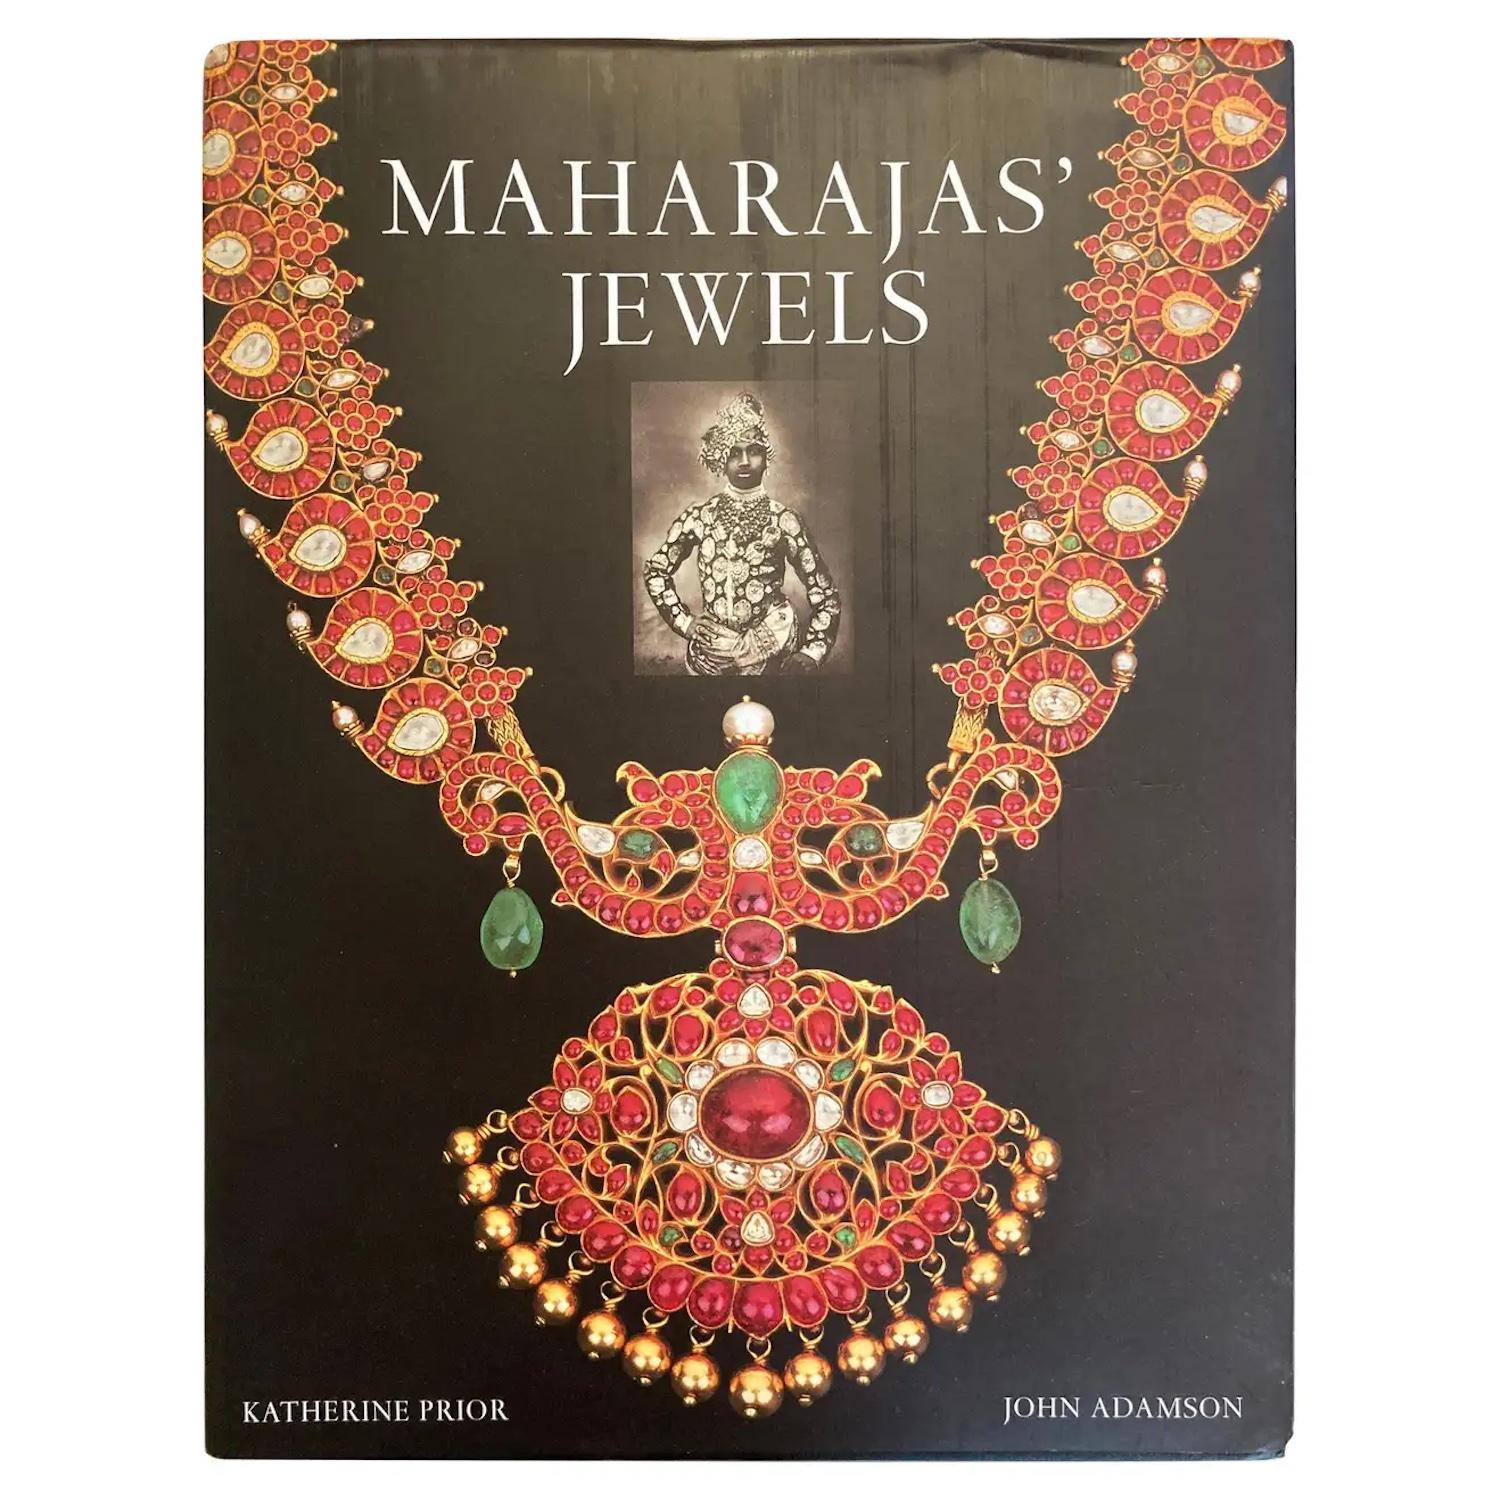 Maharaja's Jewels Table Book by Katherine Prior, Assouline.
The stories of Indian princes and their jewelry and precious stones are brought together in this illustrated narrative tracing the rise and fall of India's leading royal houses through the